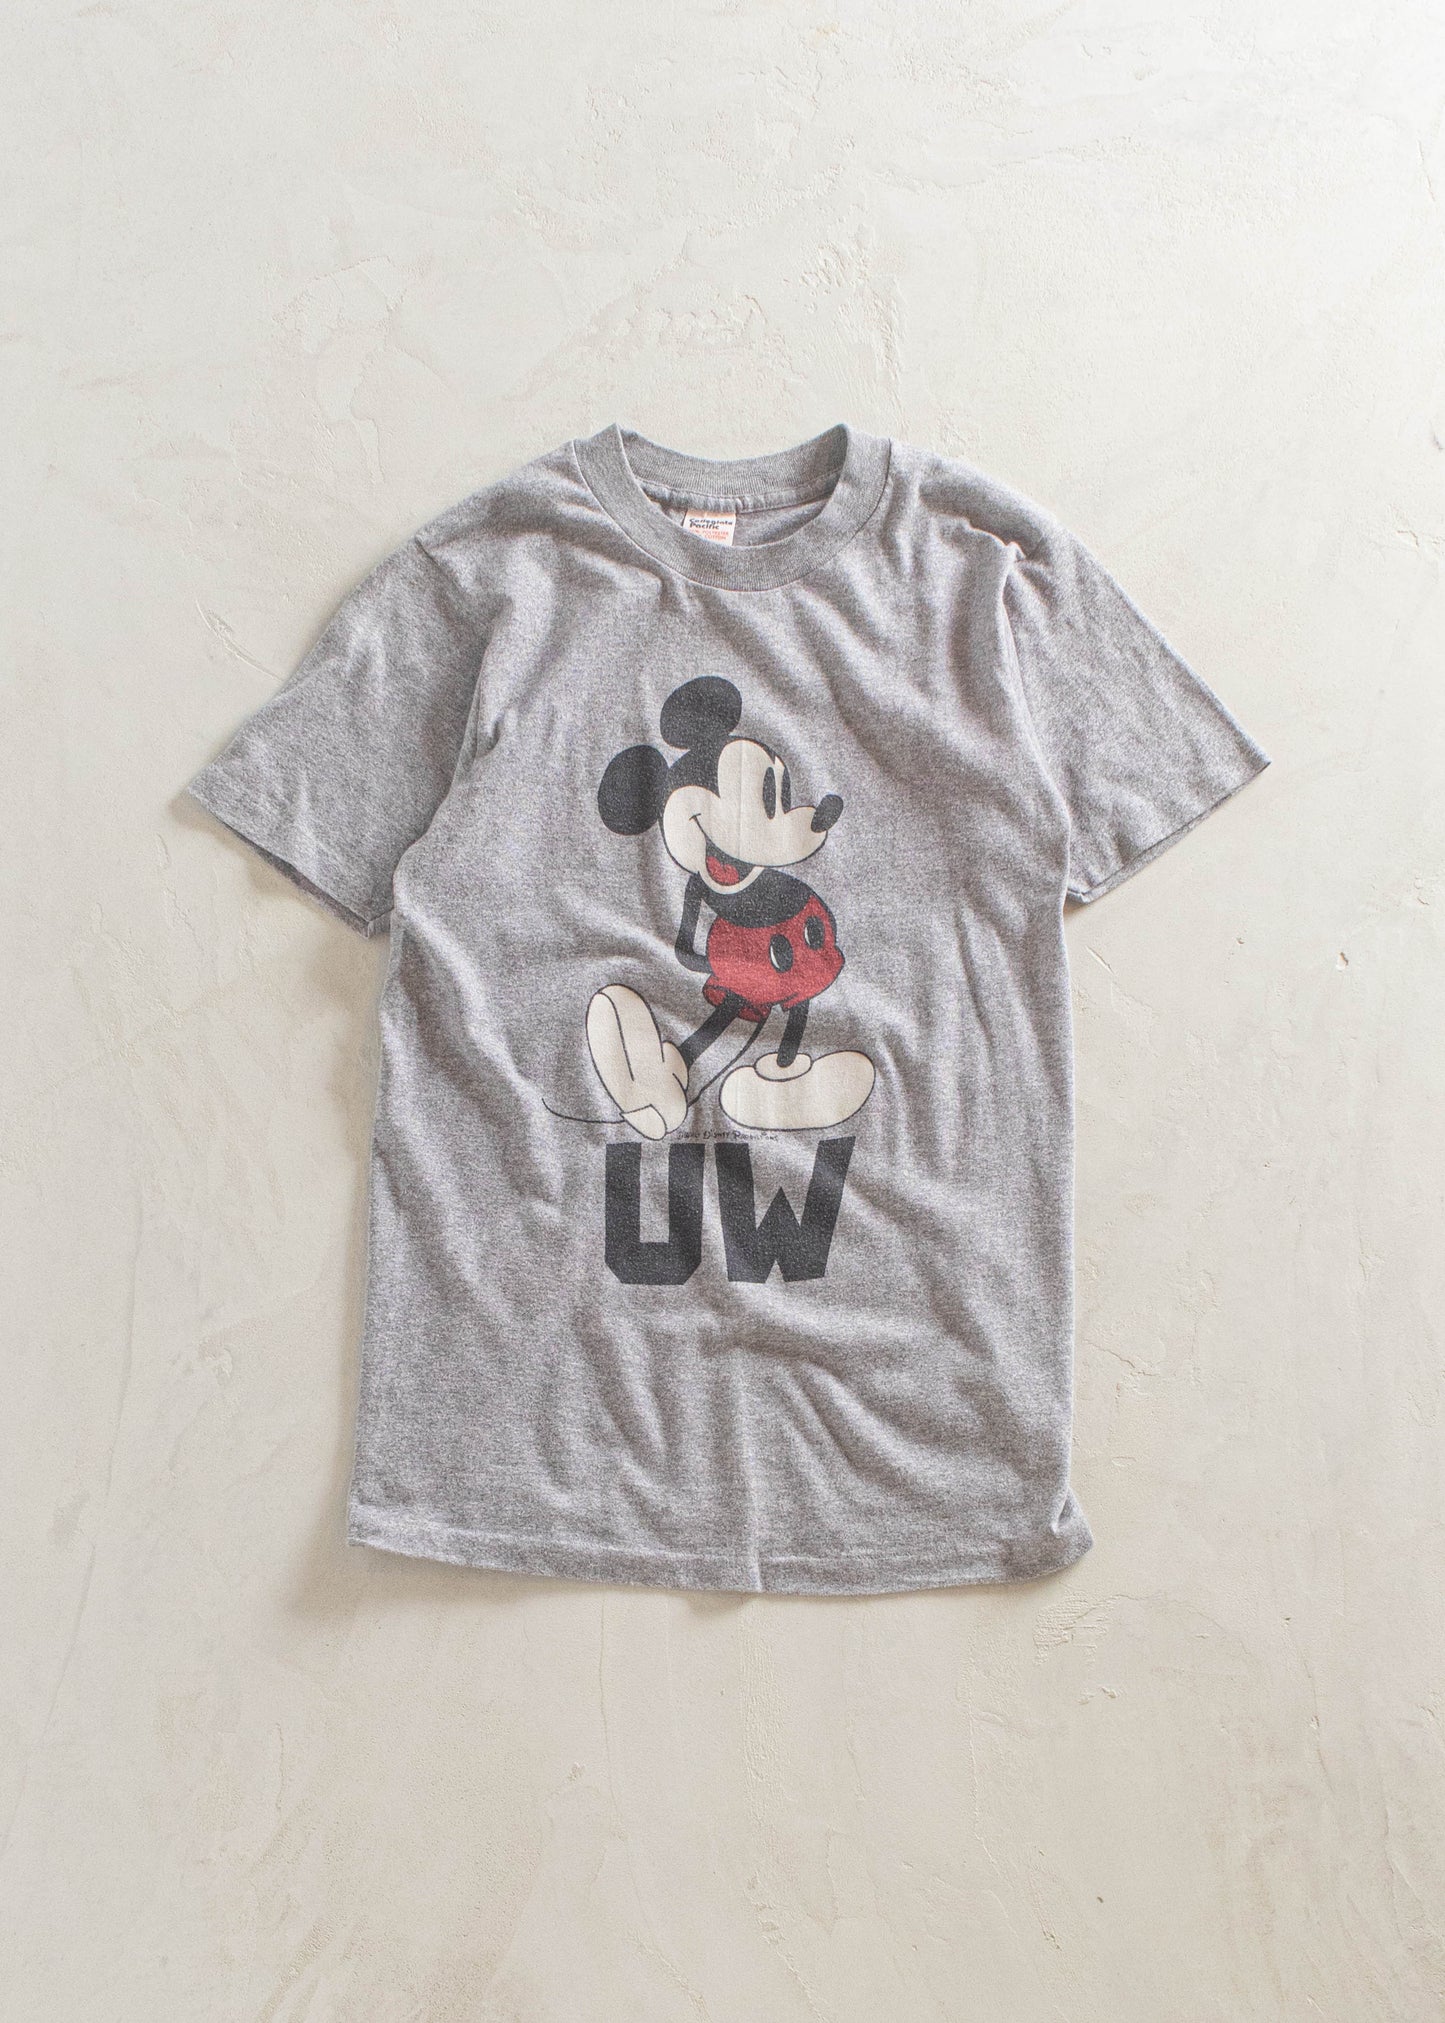 Vintage 1980s Collegiate Pacific Mickey Mouse T-Shirt Size 2XS/XS